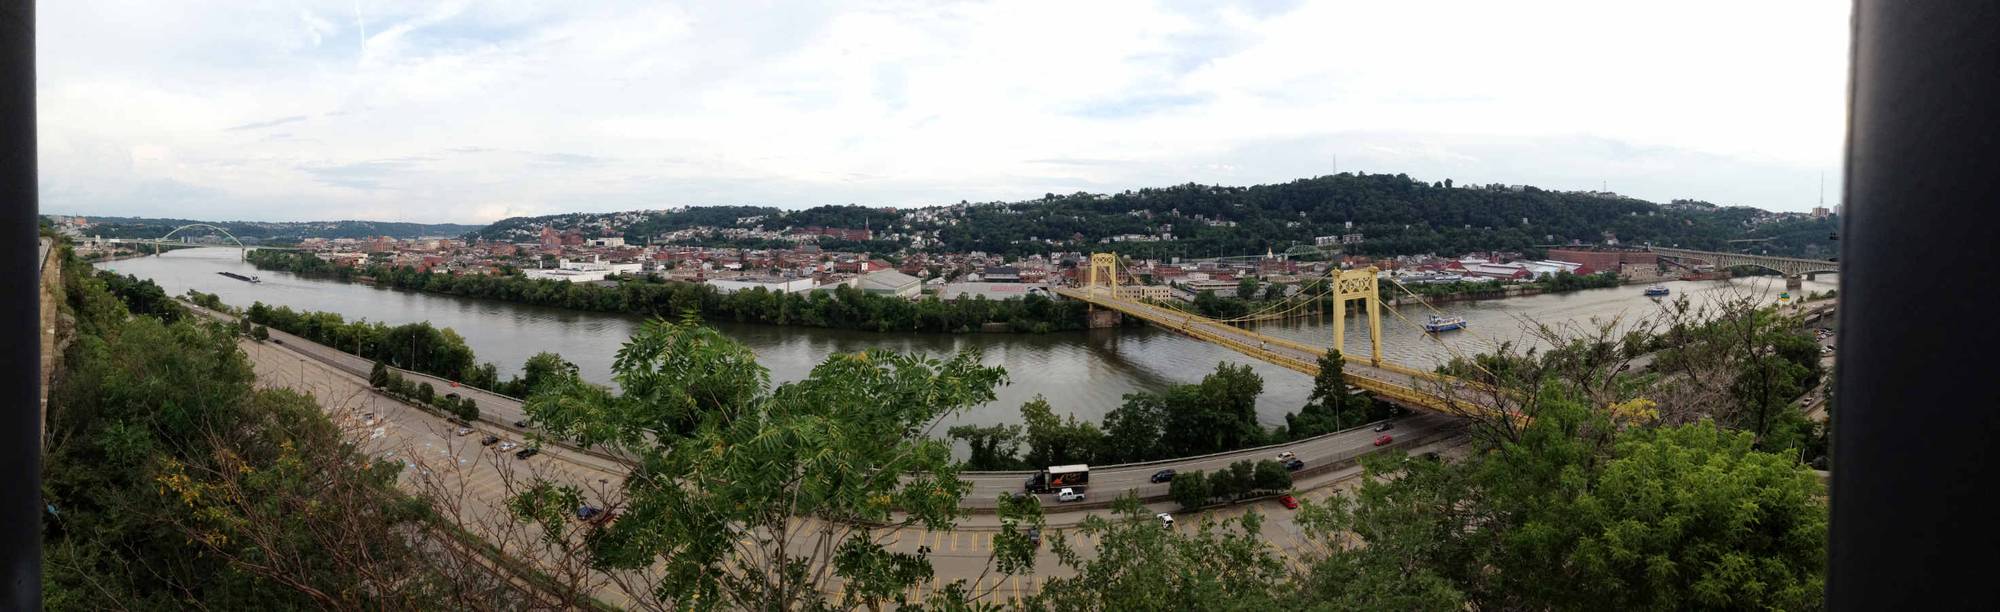 Panorama of South Pittsburgh